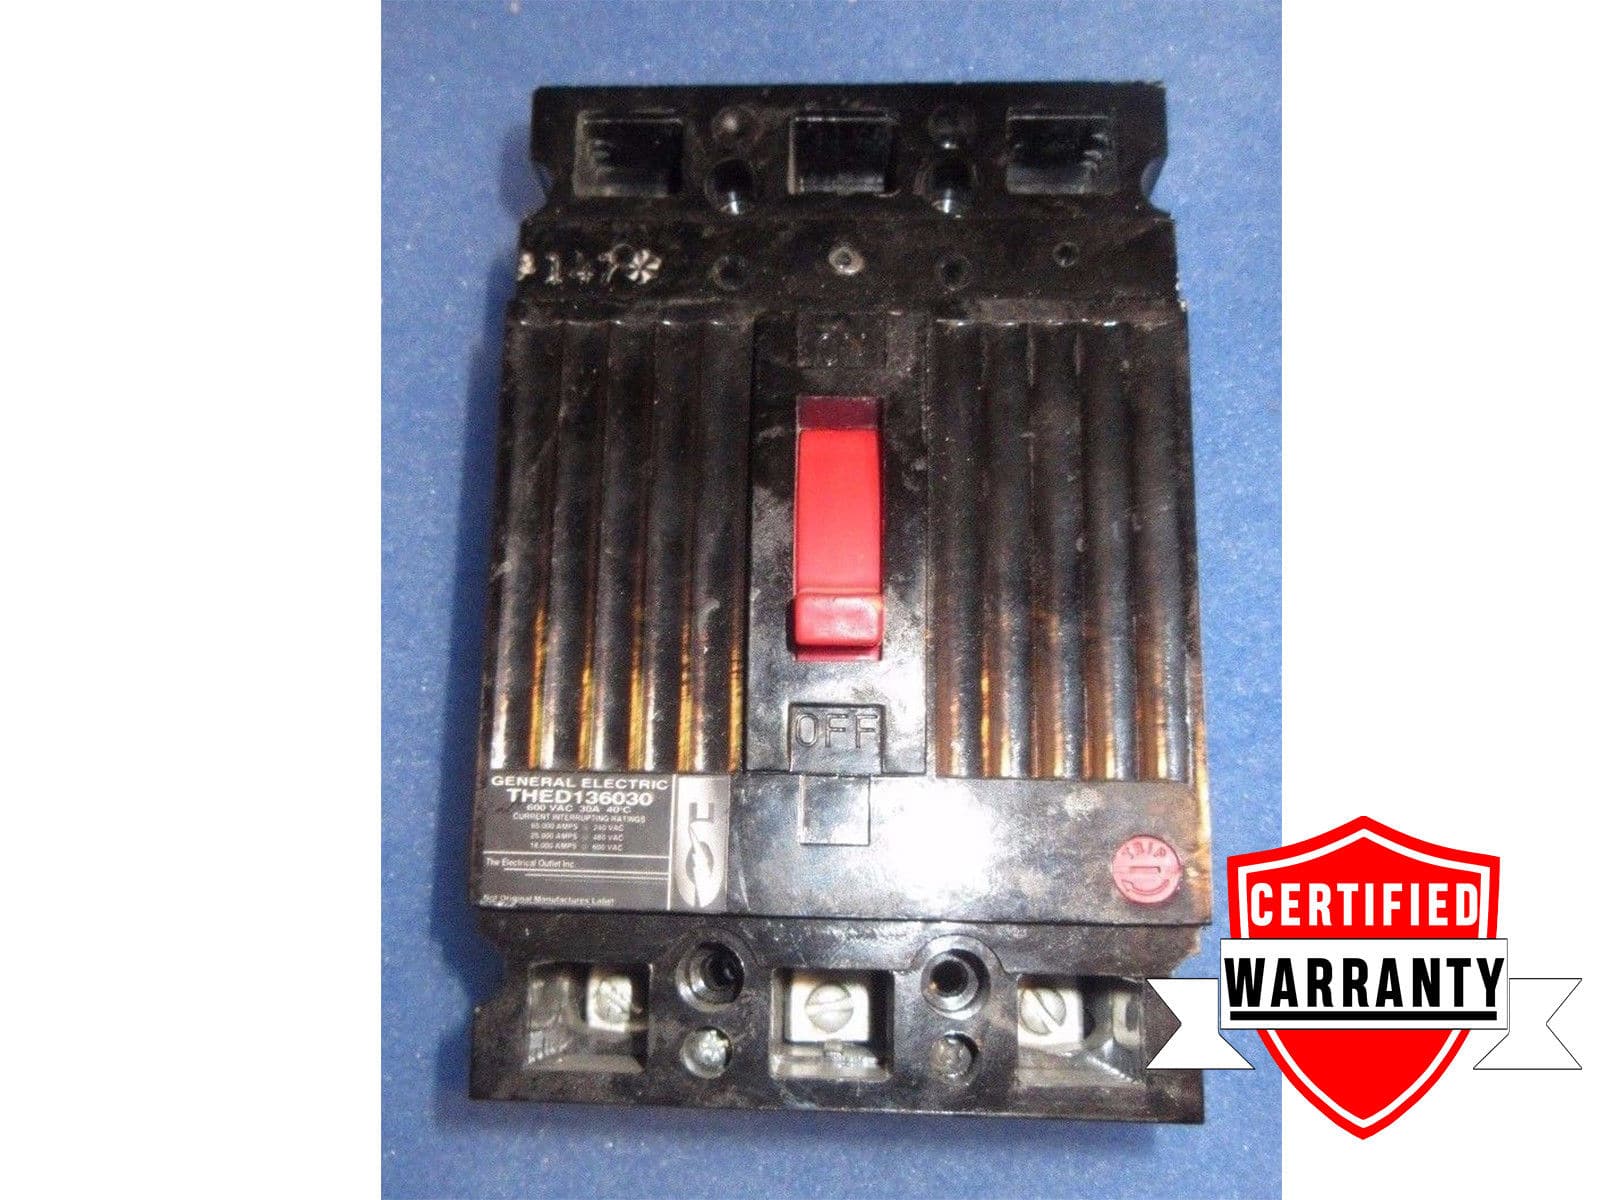 Details about   GE THED THED136030 30 Amp 600 Volt 3 Pole Circuit Breaker-Warranty 